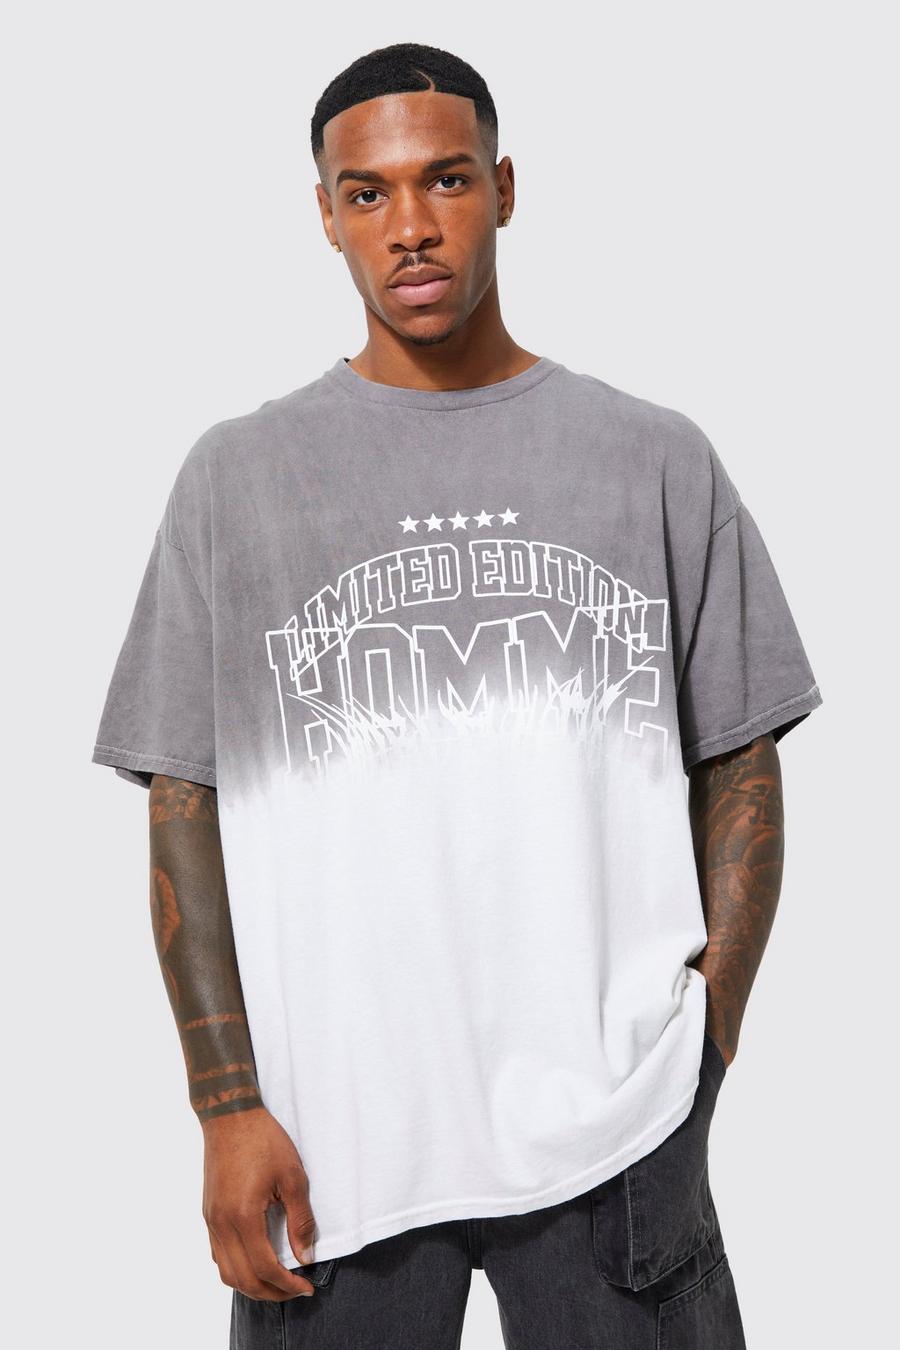 Reclaimed Vintage inspired oversized washed t-shirt with logo